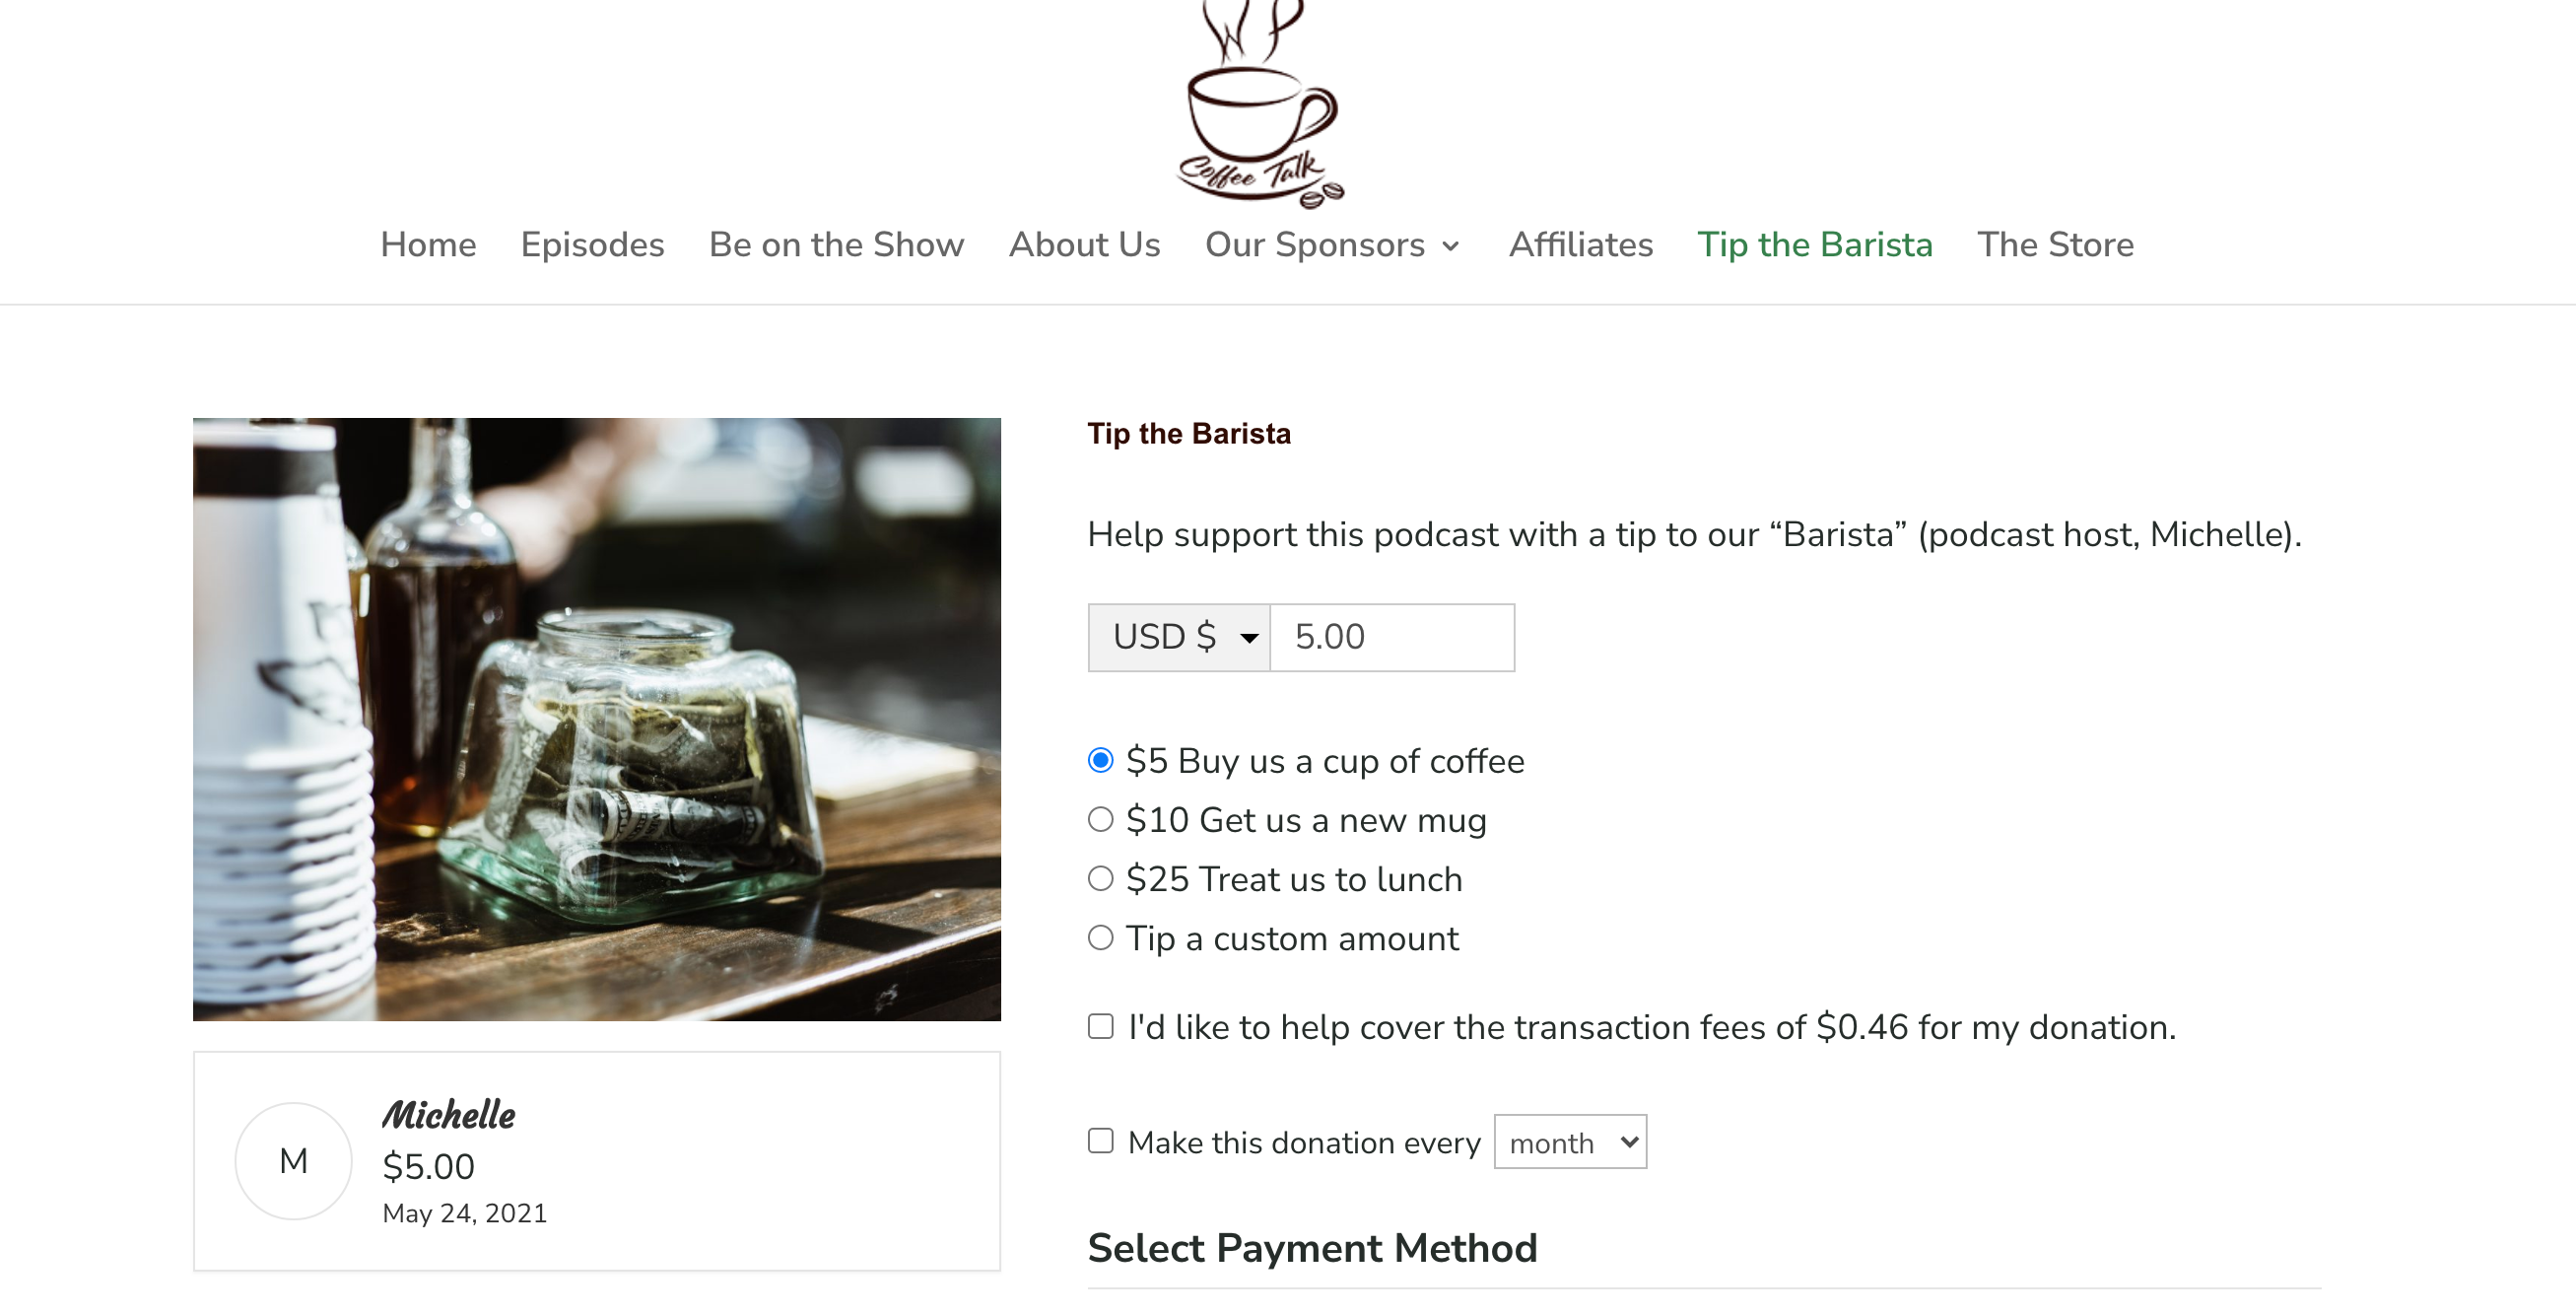 On WP Coffee Talk, you can tip the 'barista' by giving $5 for a cup of coffee, $10 for a new mug, $25 to buy the team lunch, or give a custom tip amount. 